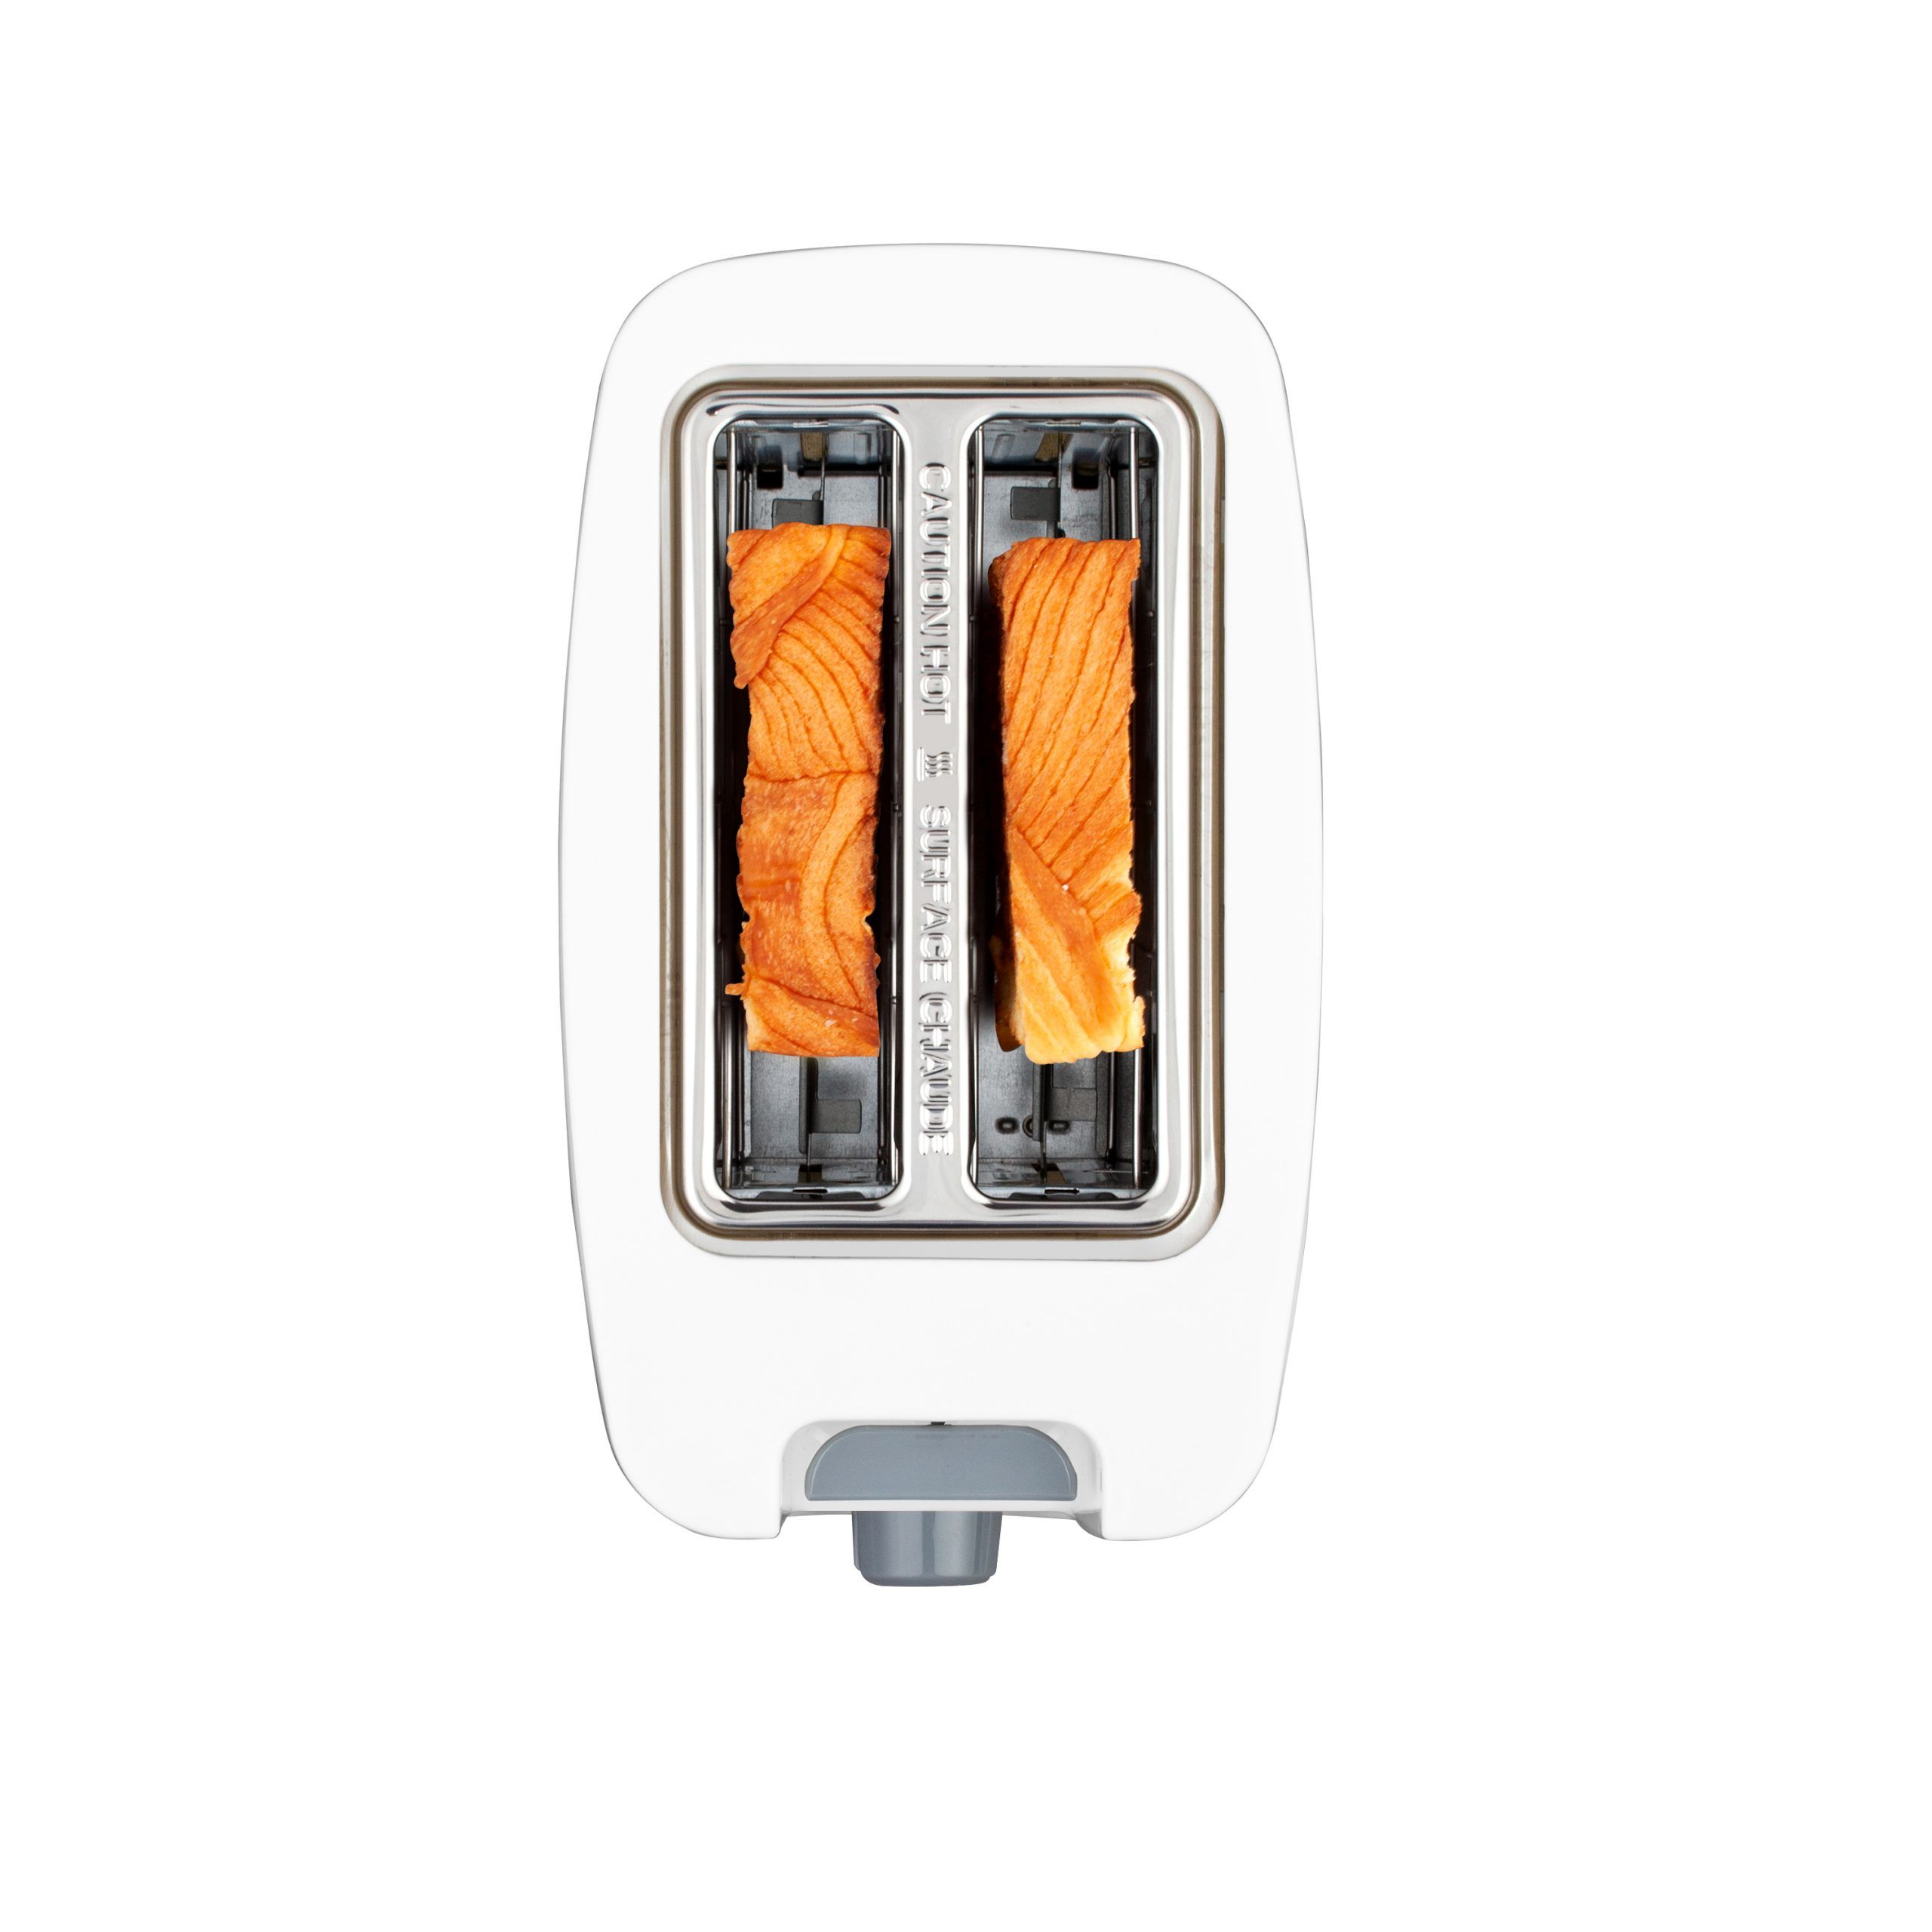 2-SLICE COOL TOUCH TOASTER, Everyday Products: Maxi-Aids, Inc.